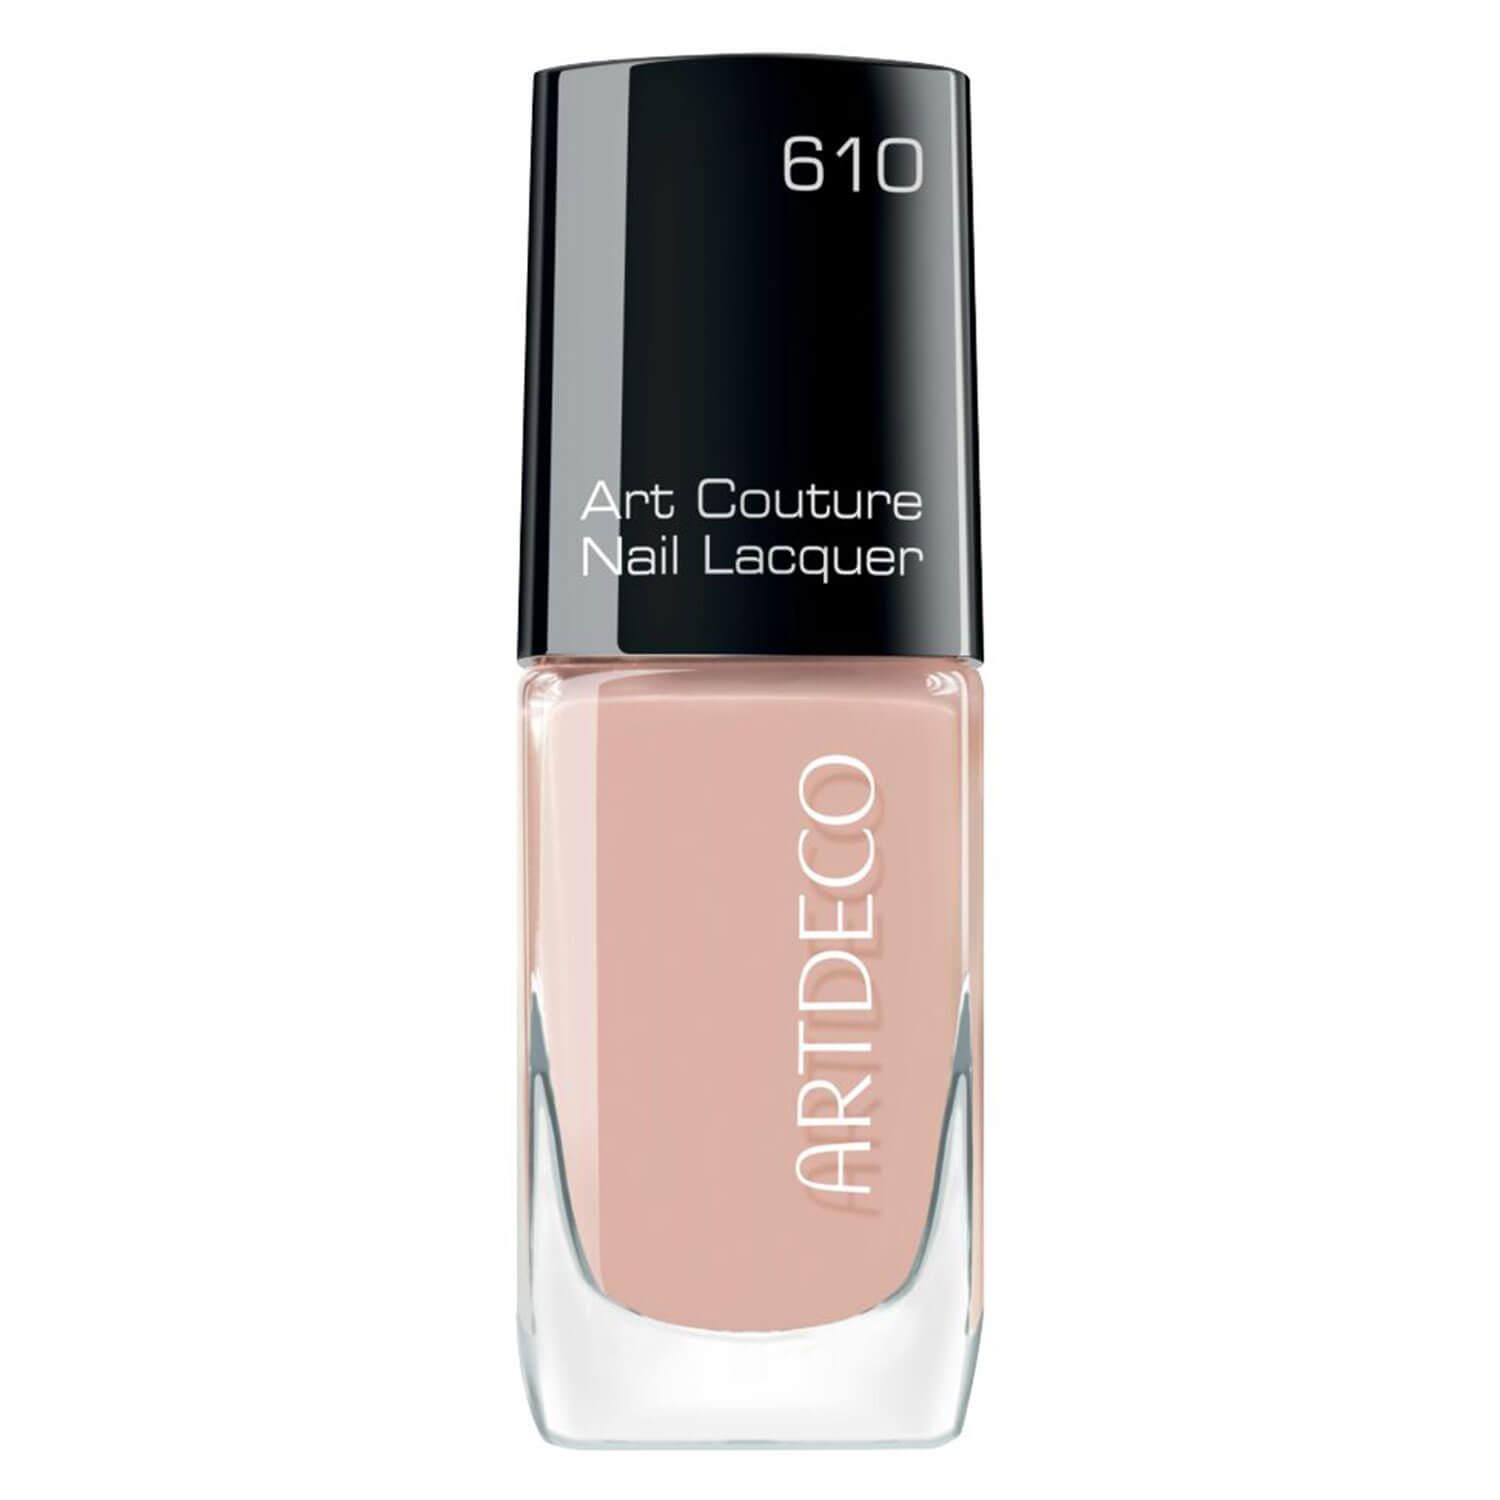 Art Couture - Nail Lacquer Nude 610